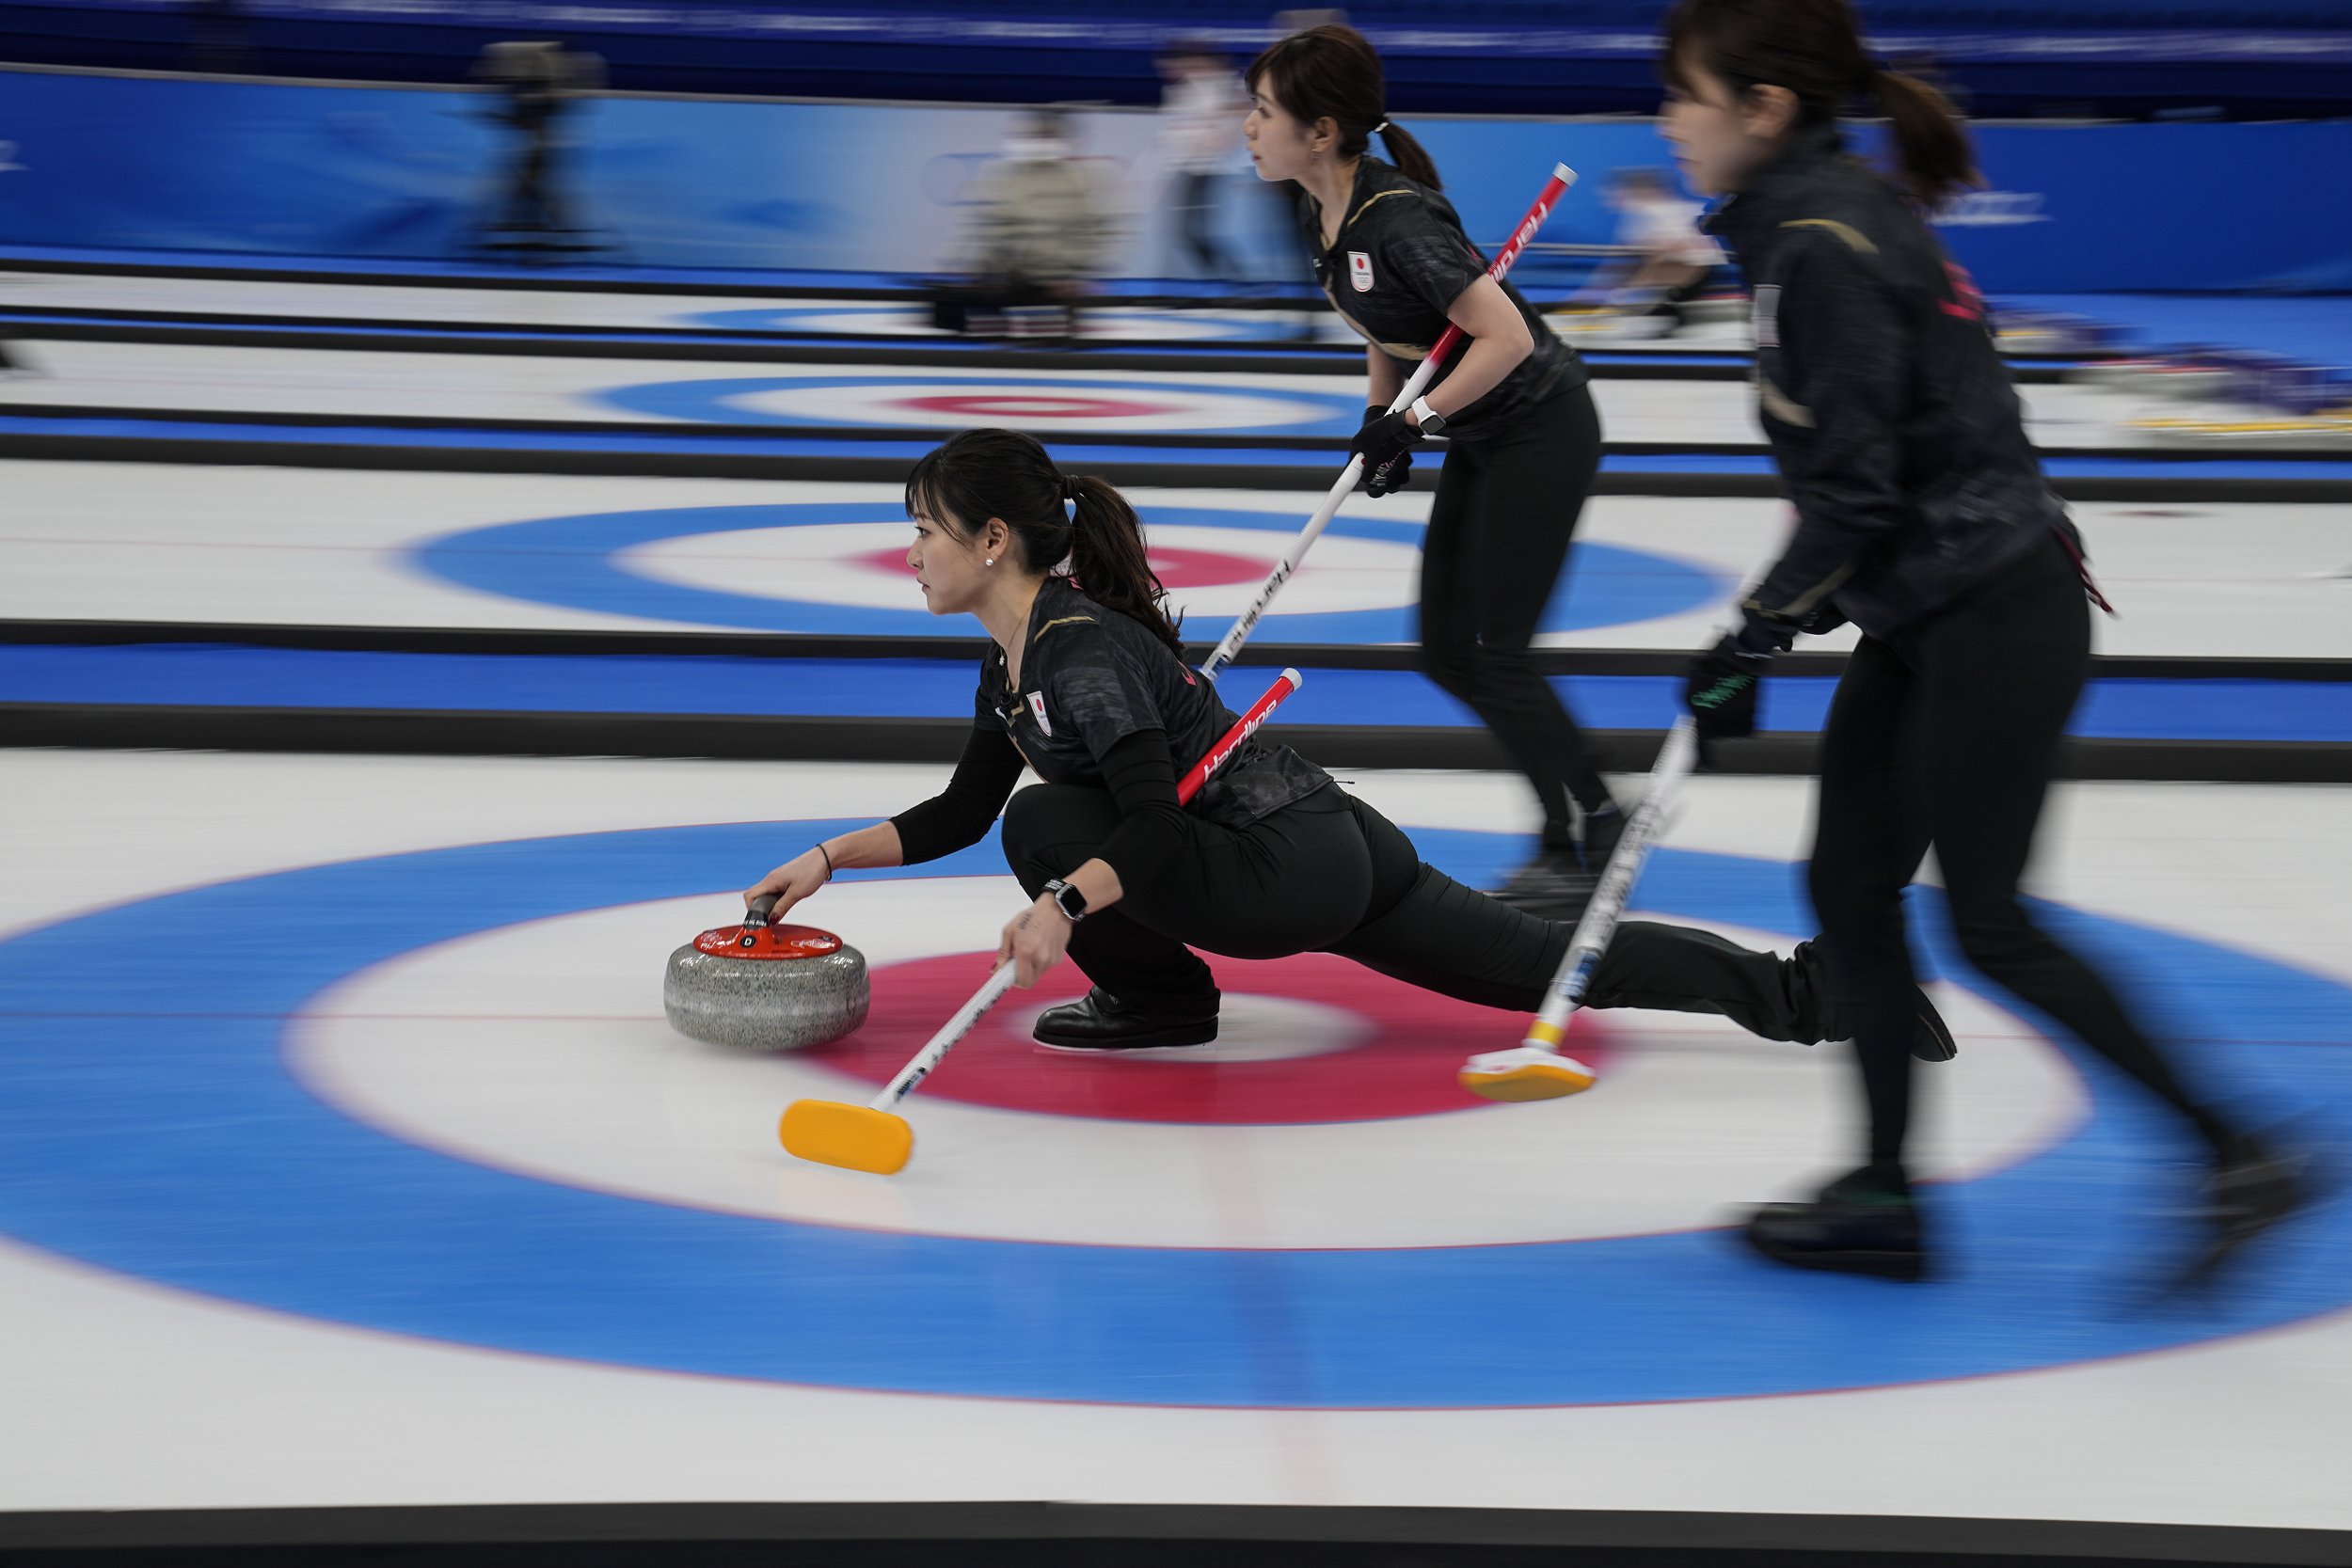  Japan's Chinami Yoshida throws a rock during a women's curling match against Denmark at the Beijing Winter Olympics Saturday, Feb. 12, 2022, in Beijing. (AP Photo/Brynn Anderson) 